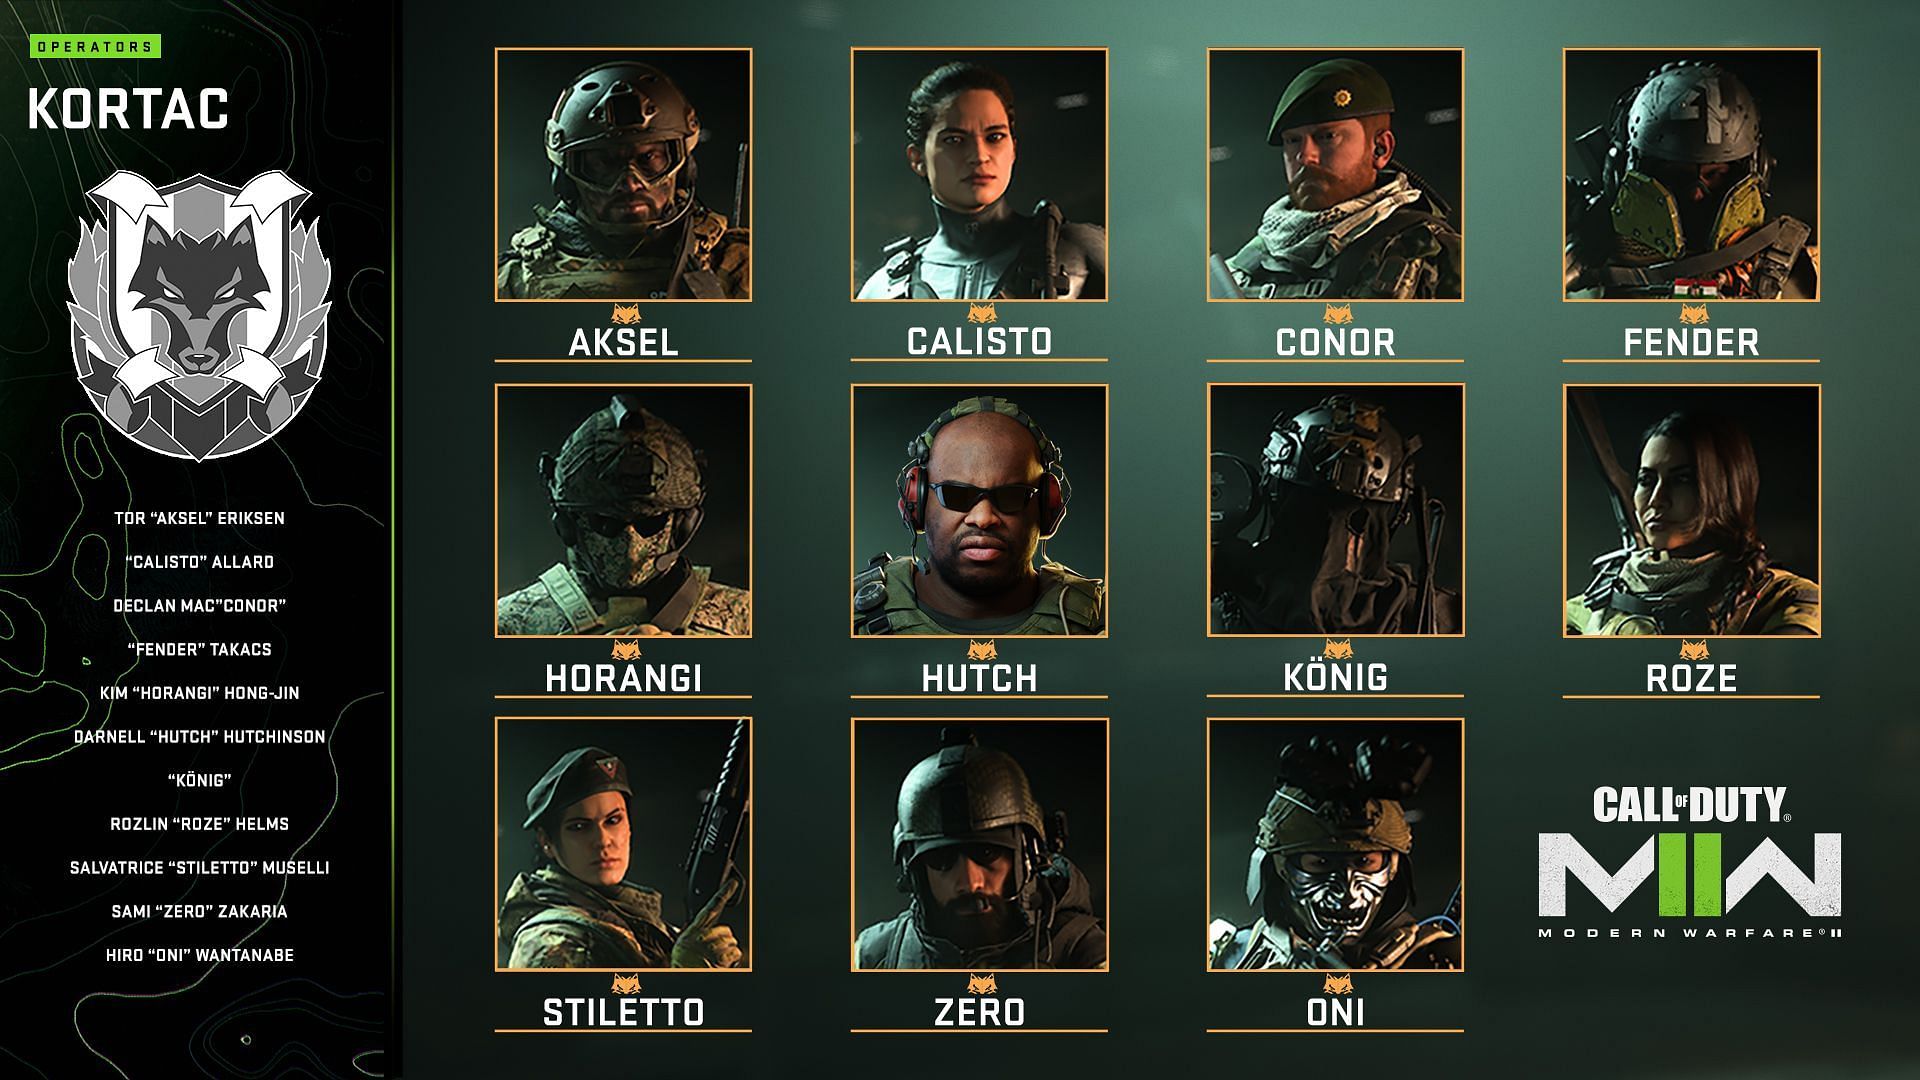 The Kortac operators in the game (Image via Activision)